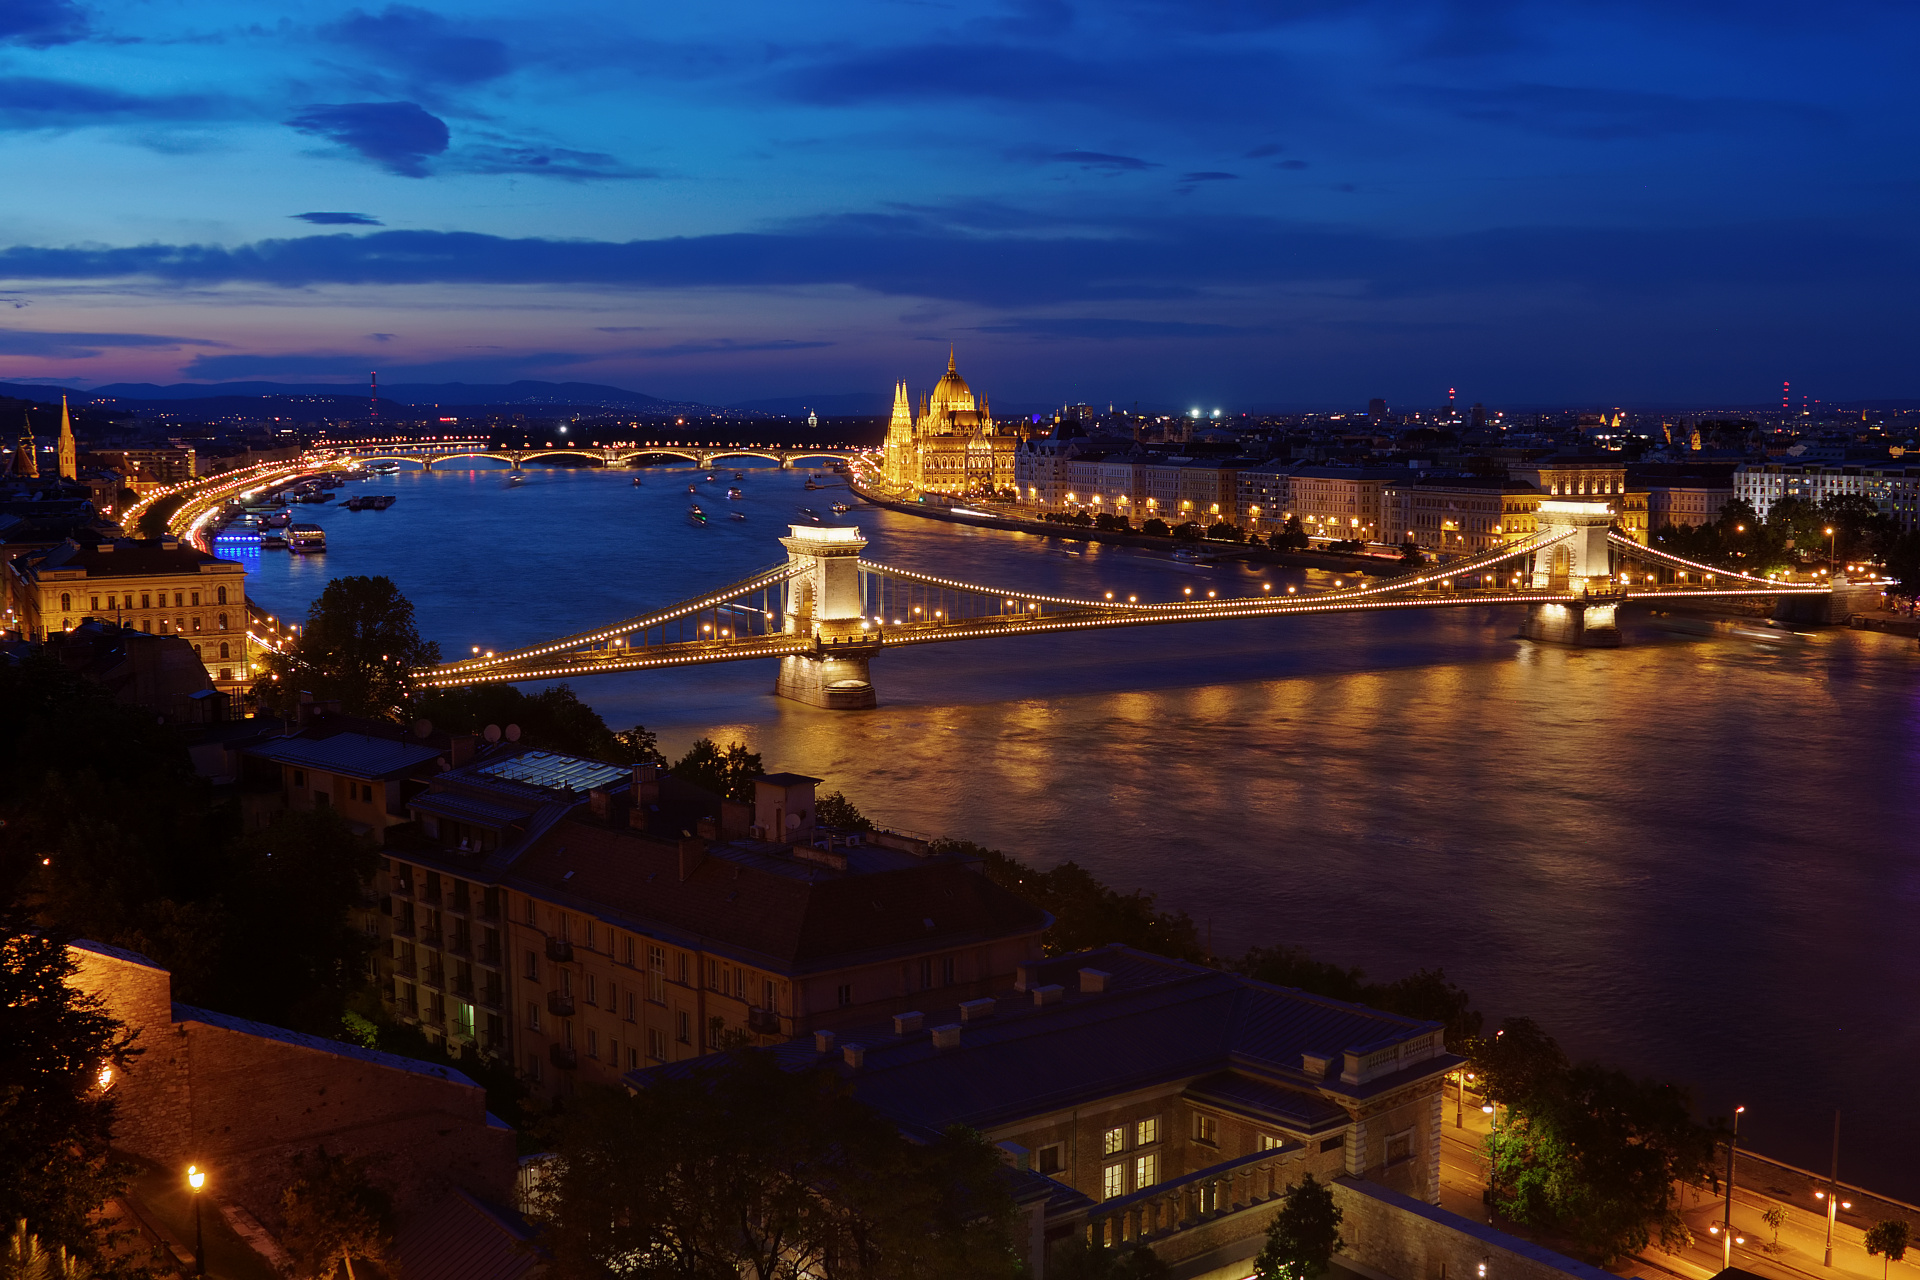 Danube and Pest from Buda Castle (Travels » Budapest » Budapest at Night)